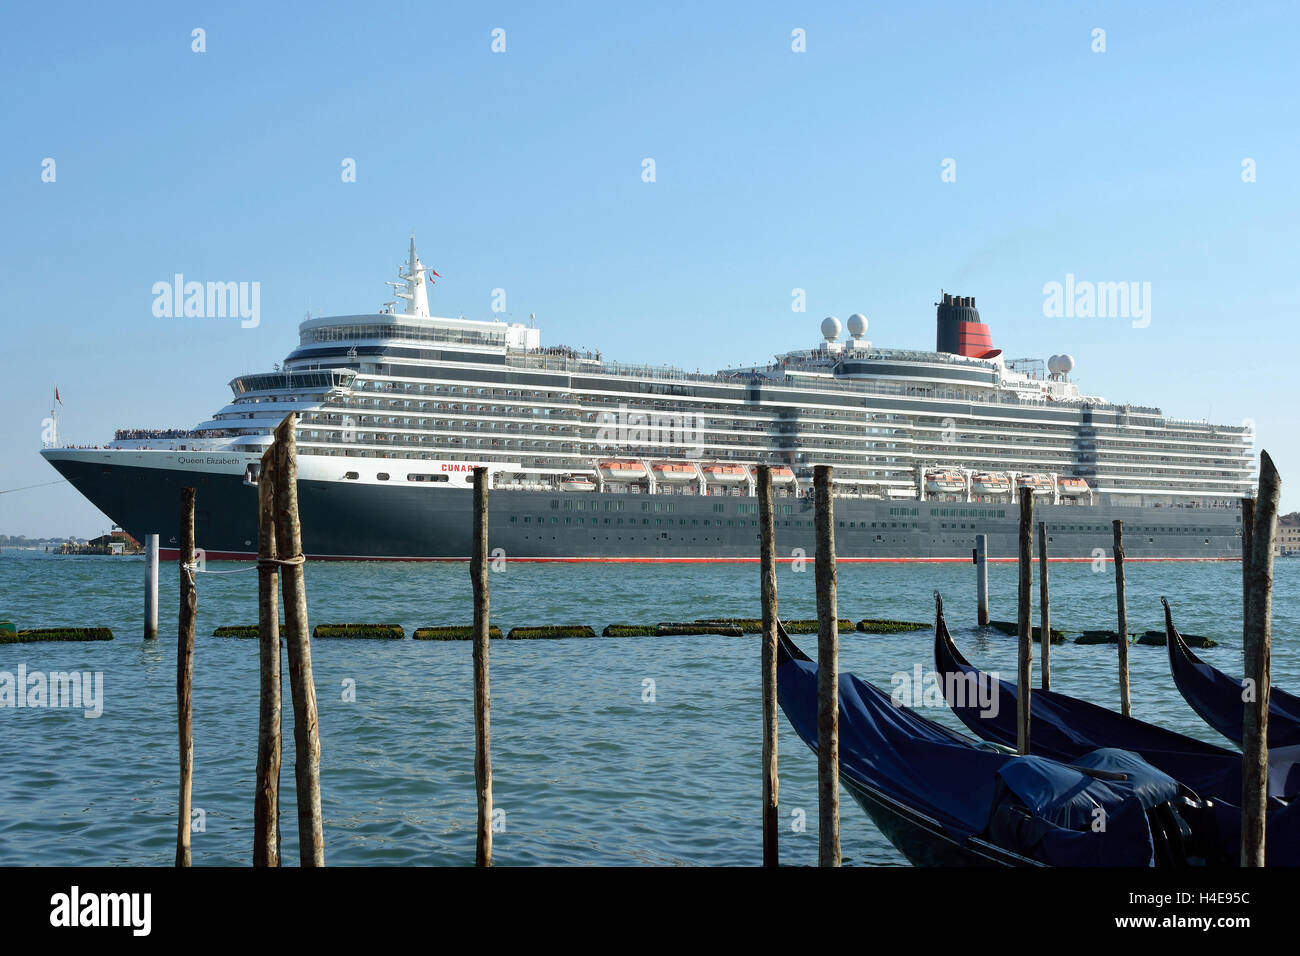 Cruise ship in the Lagoon of Venice in Italy. Stock Photo